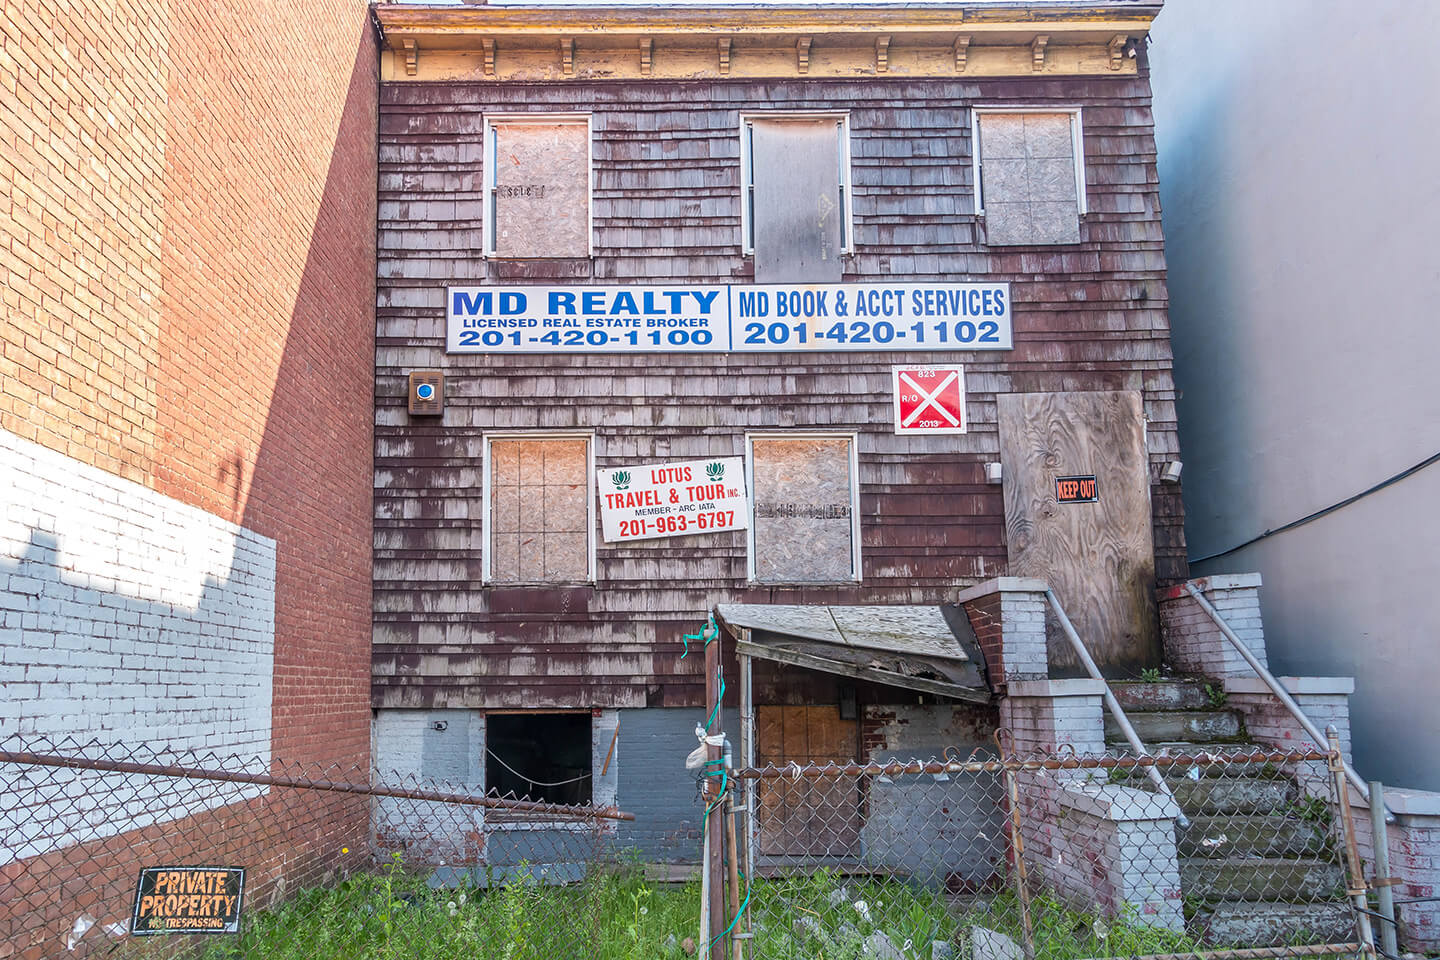 little-india-journal-square-jersey-city-md-realty-abandoned